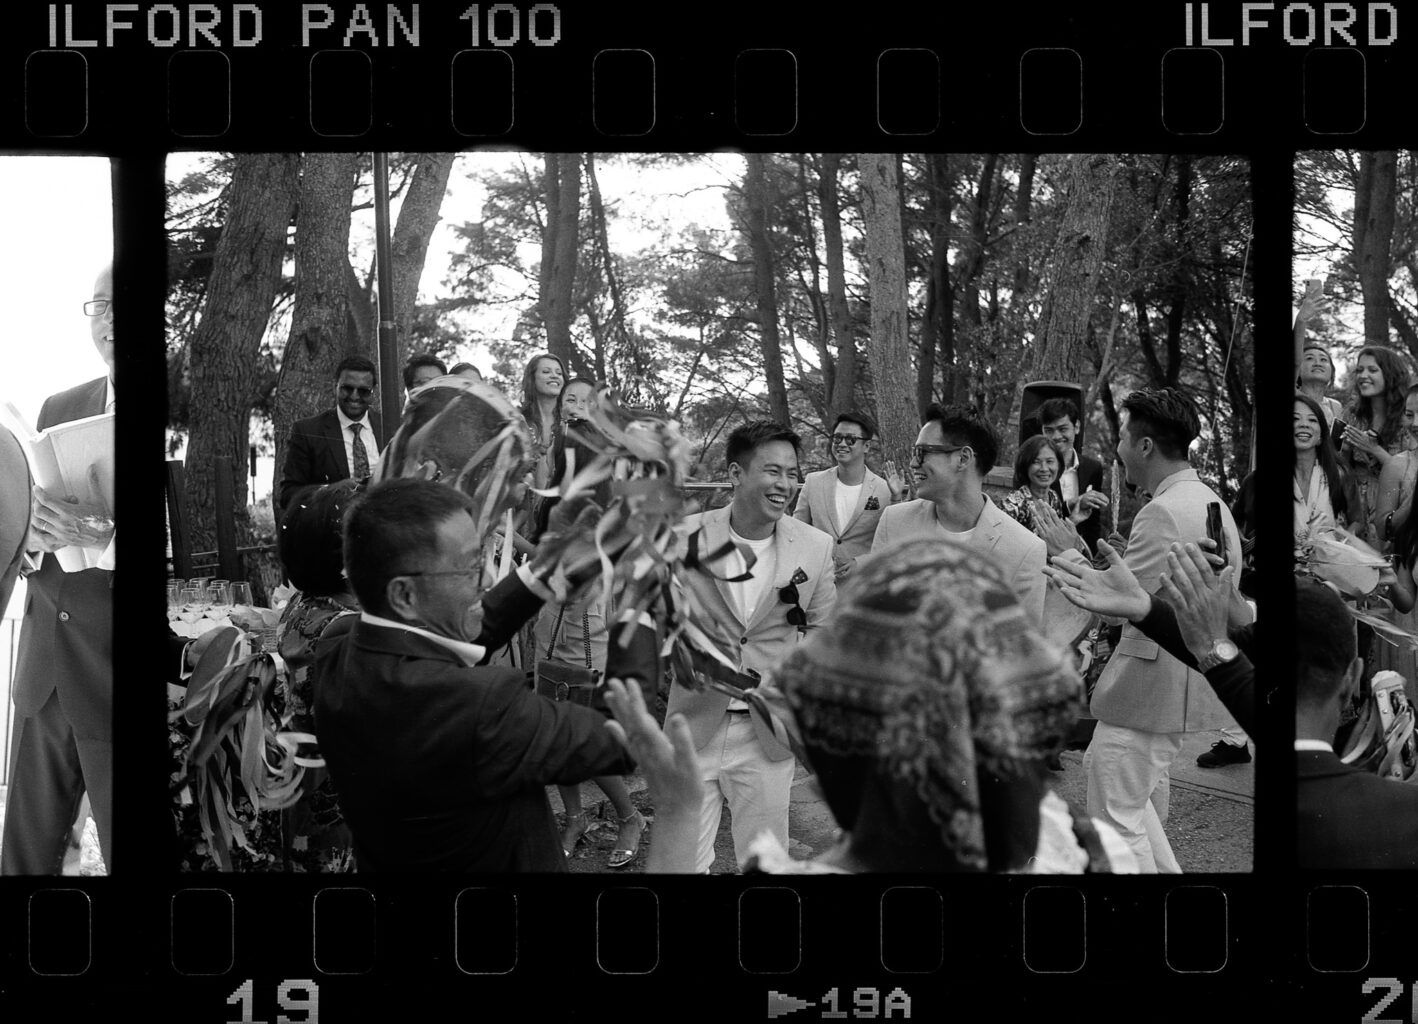 IlFord Pan 100 - 35mm Gallery 01